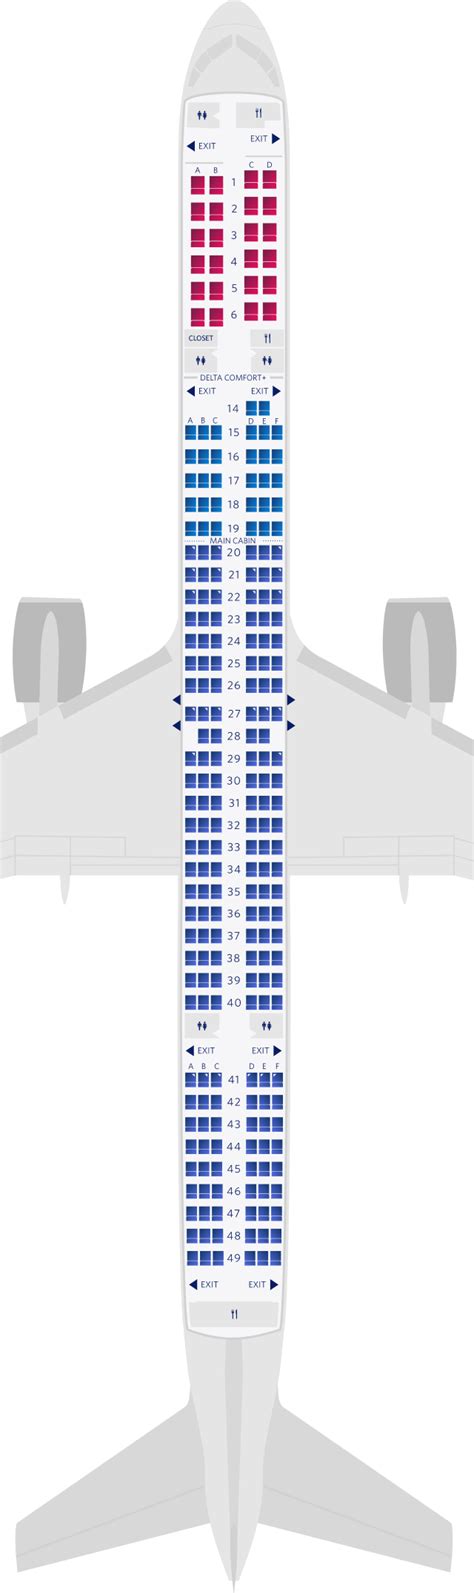 Delta 757 300 seat map. Get the best seat possible with our Delta Airlines 175 seating chart and traveler seat reviews. seat nk beta. seat nk beta. airlines. Browse All. A. Adria Airways; Aegean Airlines; Aer Lingus; Aeroflot; Aerolineas Argentinas; Aerolineas MAS; ... · Boeing 757-200 (75X) · Boeing 757-300 (75Y) · Boeing 767-300 (76L) · Boeing 767-300 (76Q and ... 